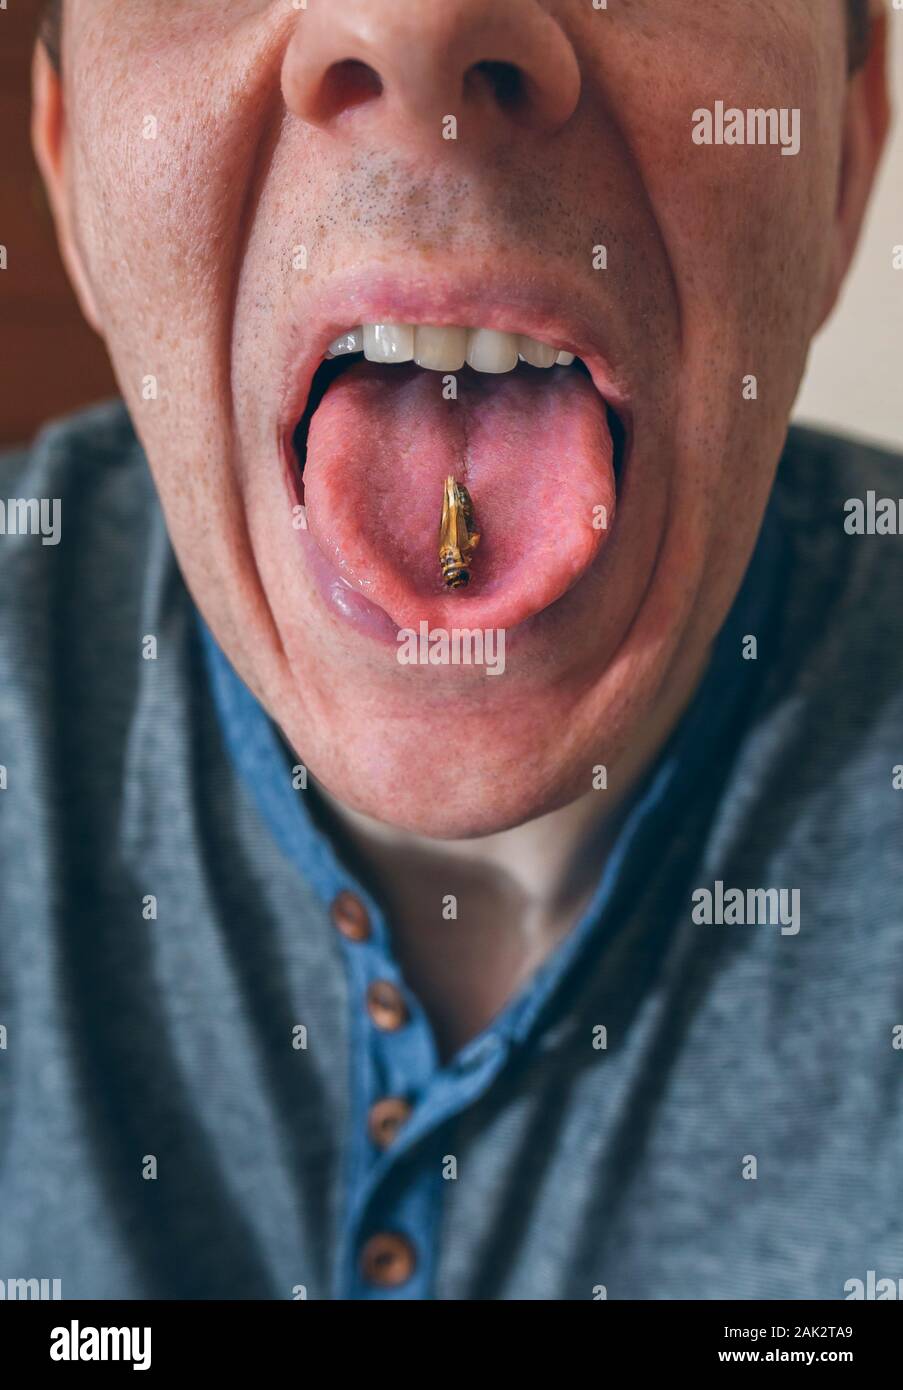 Man showing a cricket on his tongue Stock Photo